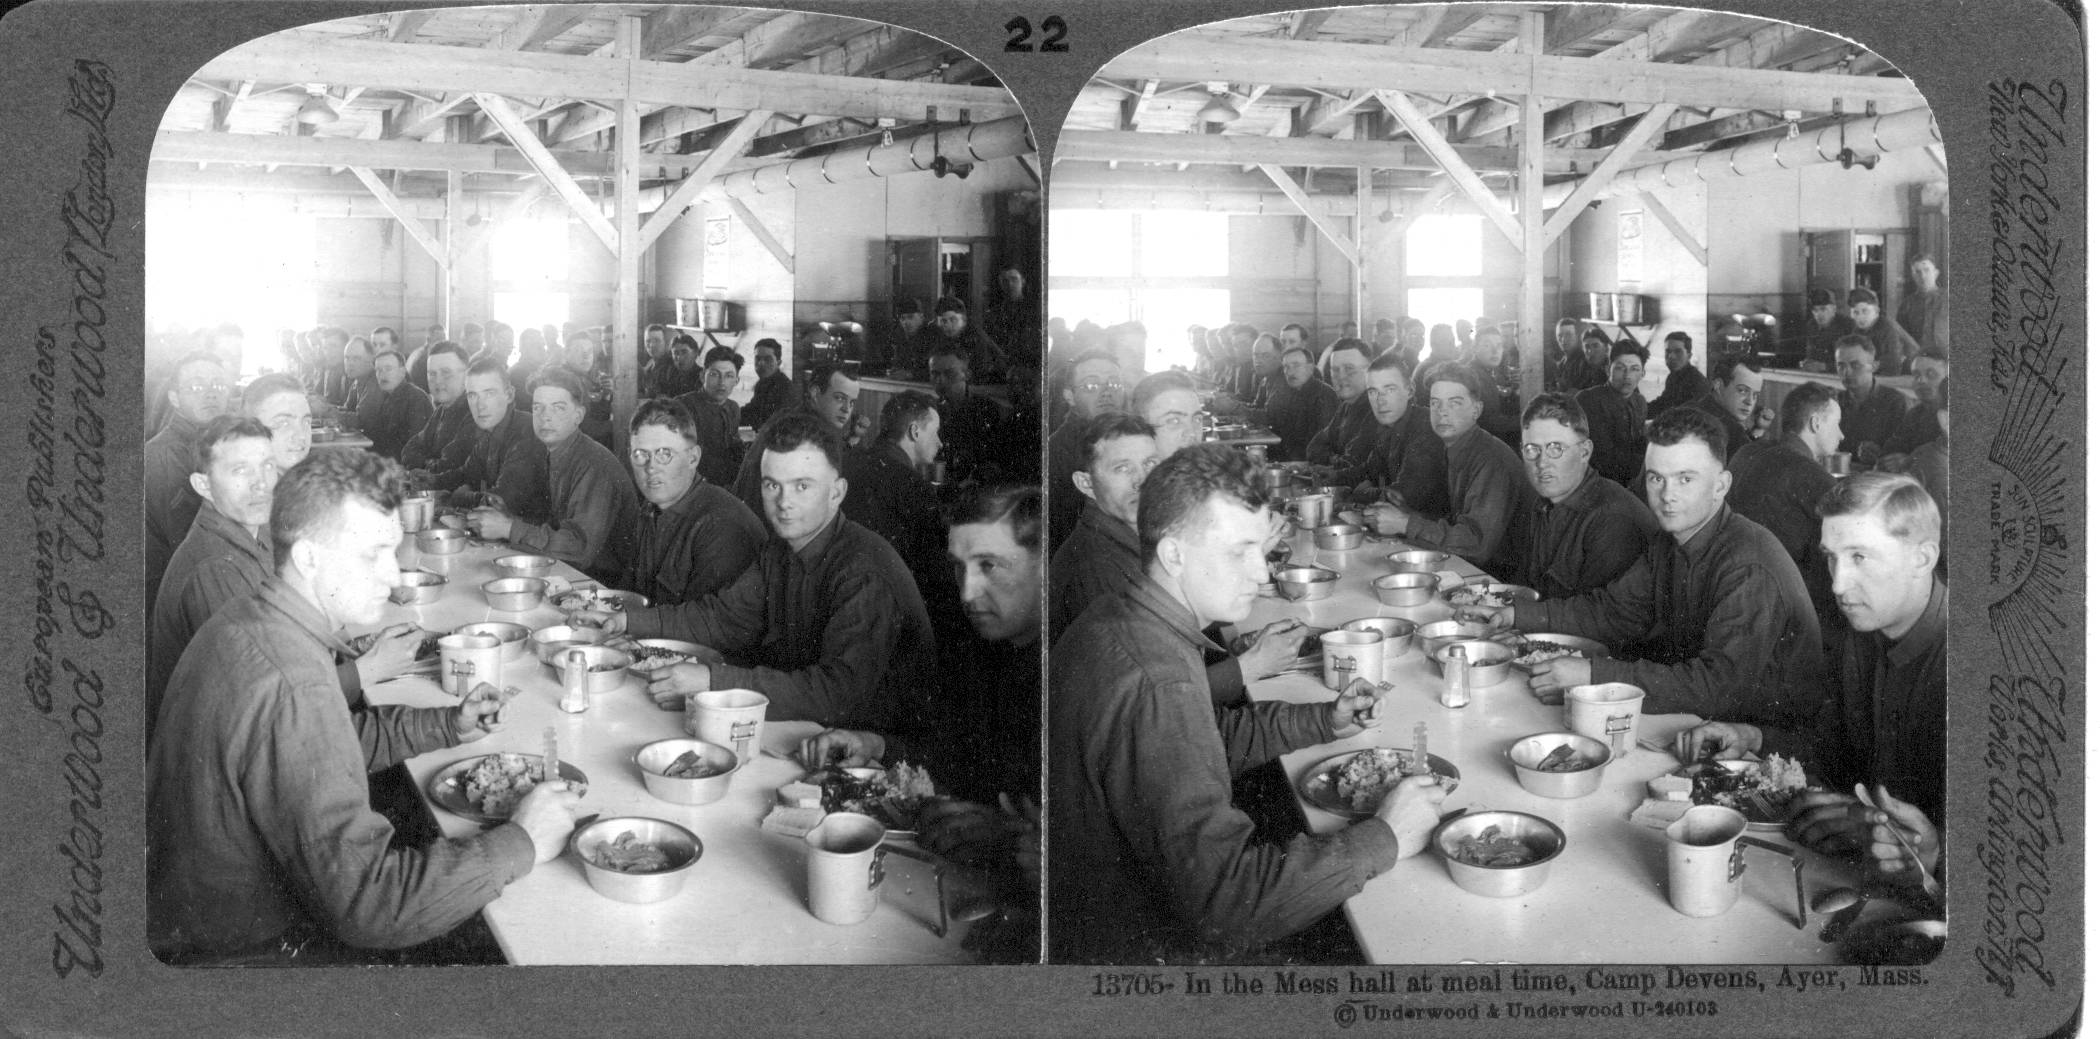 In the mess hall at meal time, Camp Devens, Ayer, Mass.